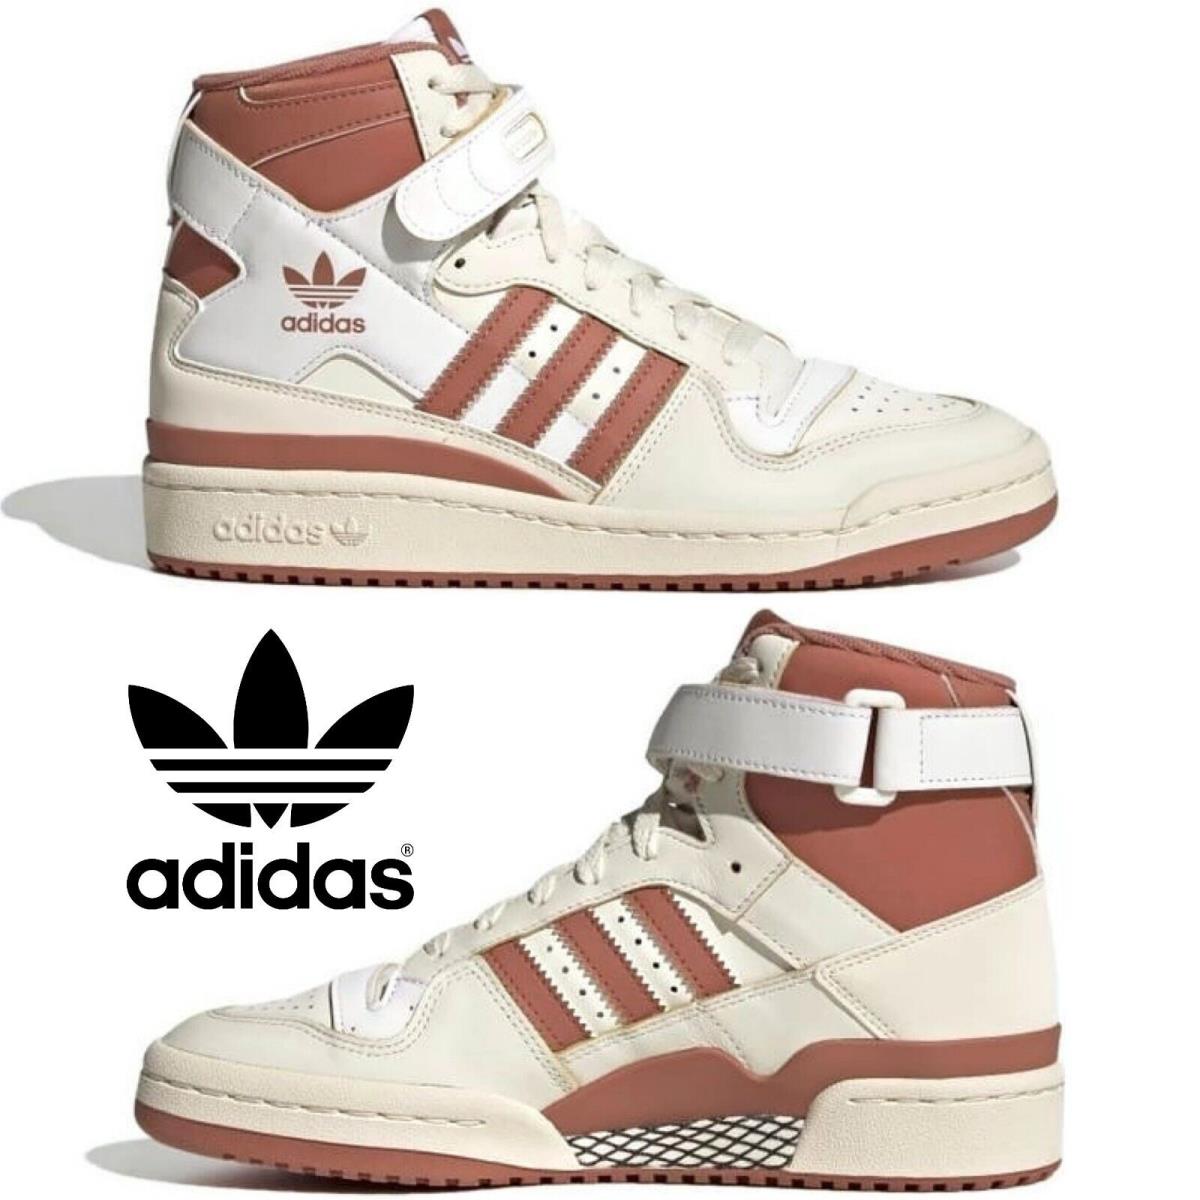 Adidas Originals Forum 84 Hi Shoes Women`s Sneakers Comfort Casual Off White - White , Off White / Magic Earth / Cloud White Manufacturer